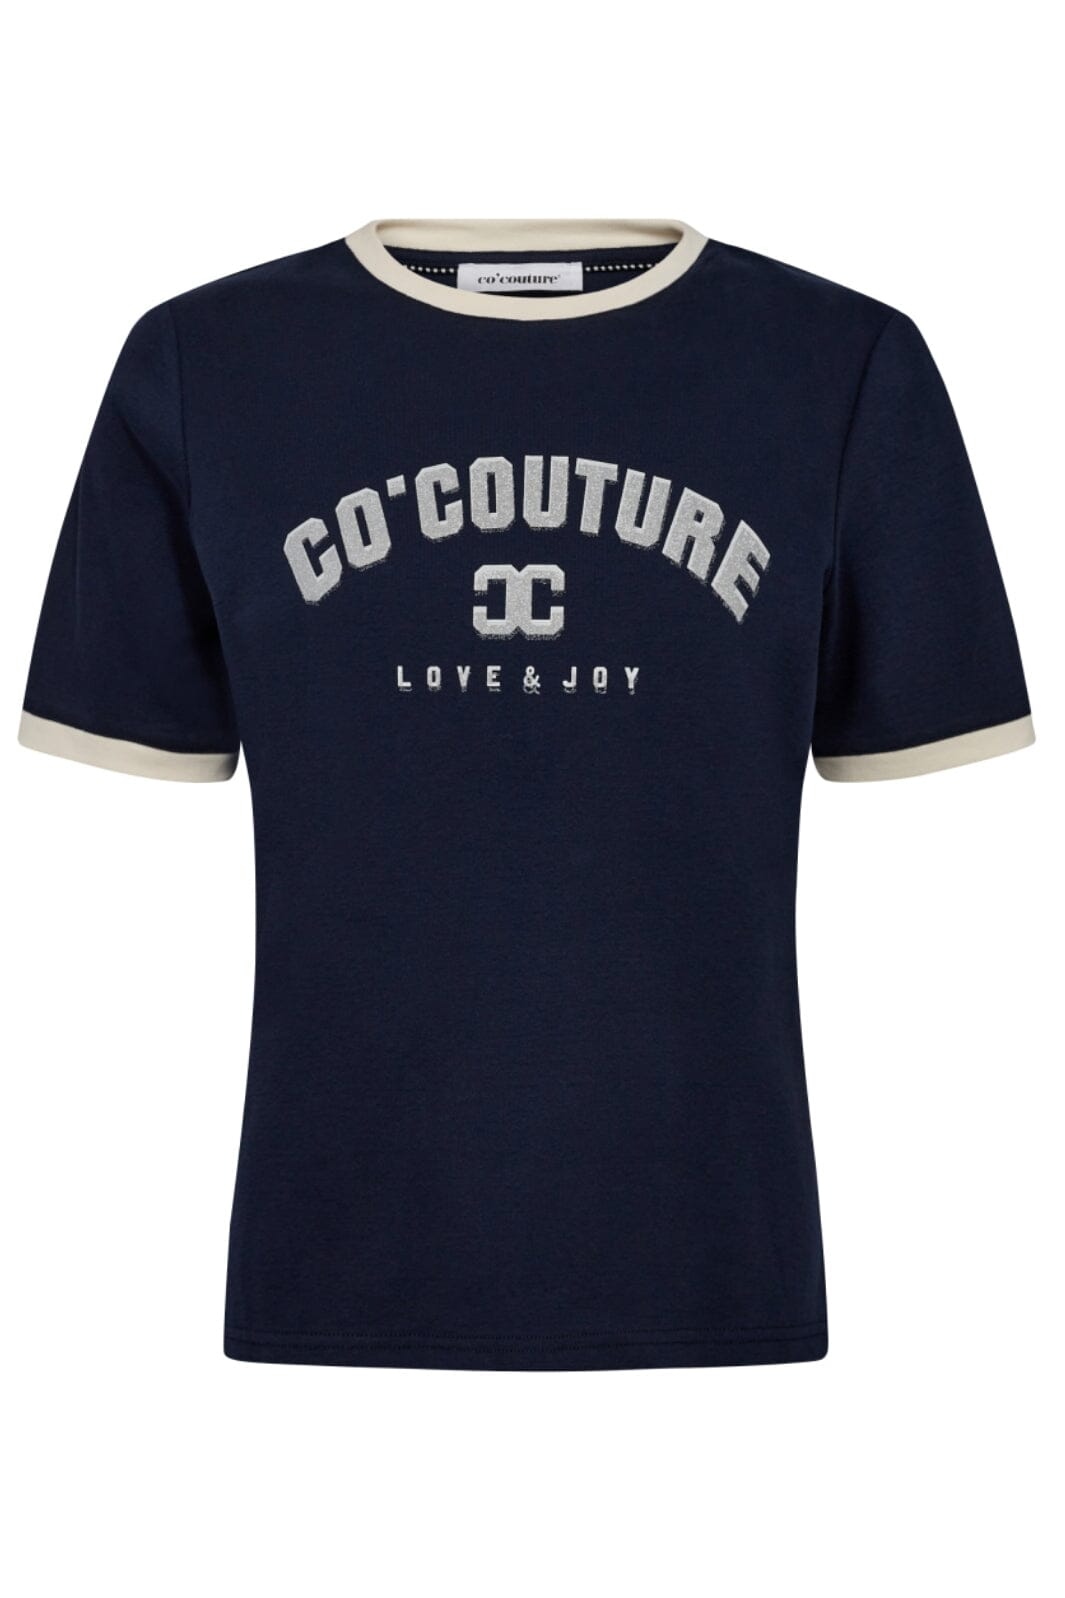 Co´couture - Edgecc Tee 33014 - 120 Navy T-shirts 